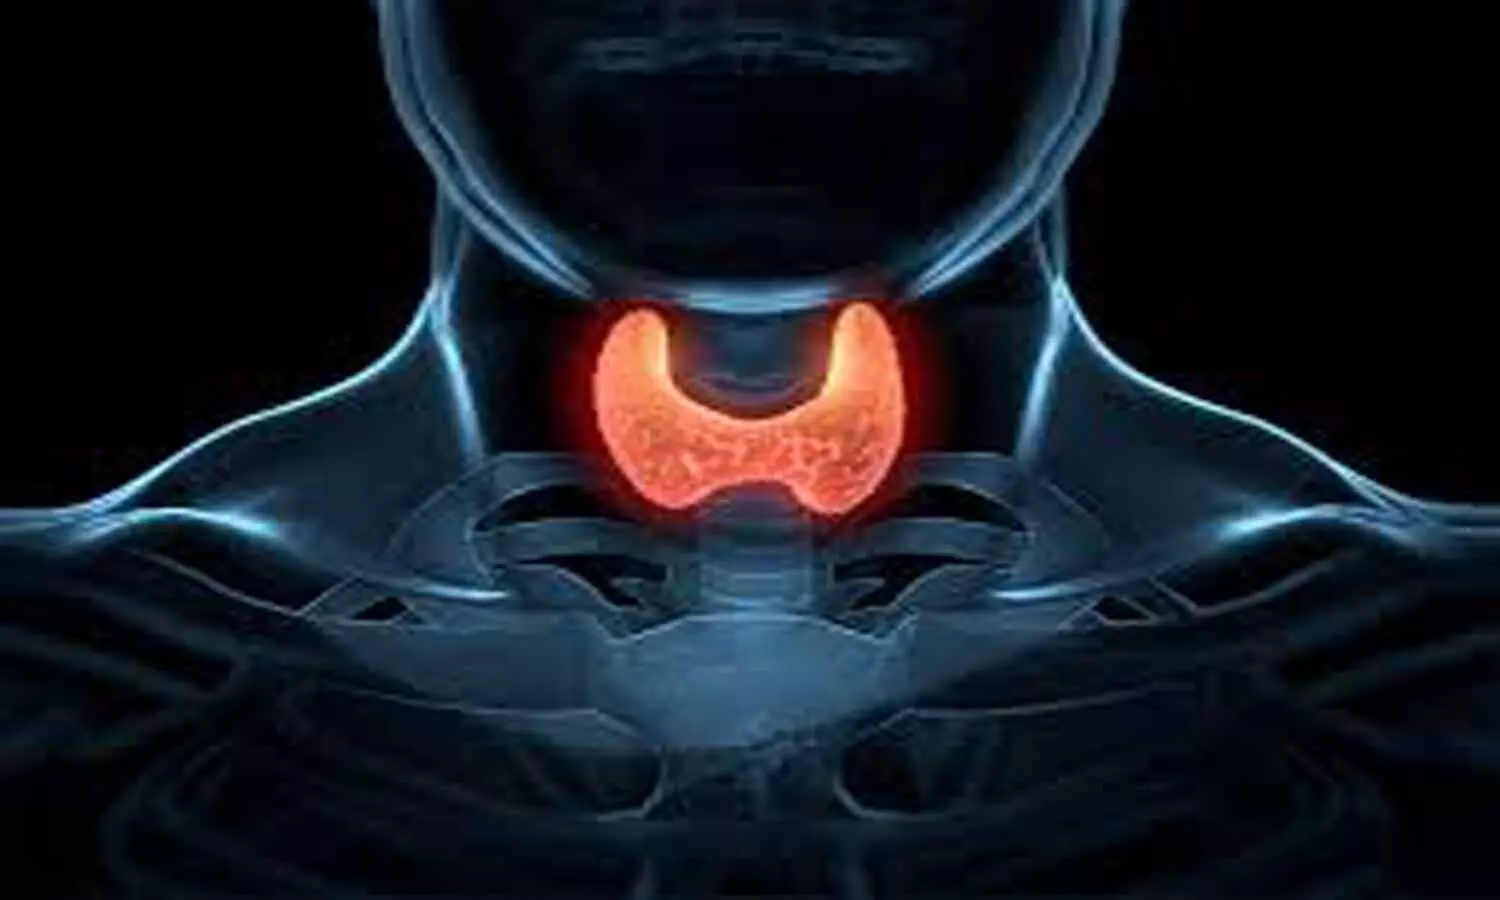 Aptinib shows increased overall survival in Patients with Thyroid Cancer: JAMA